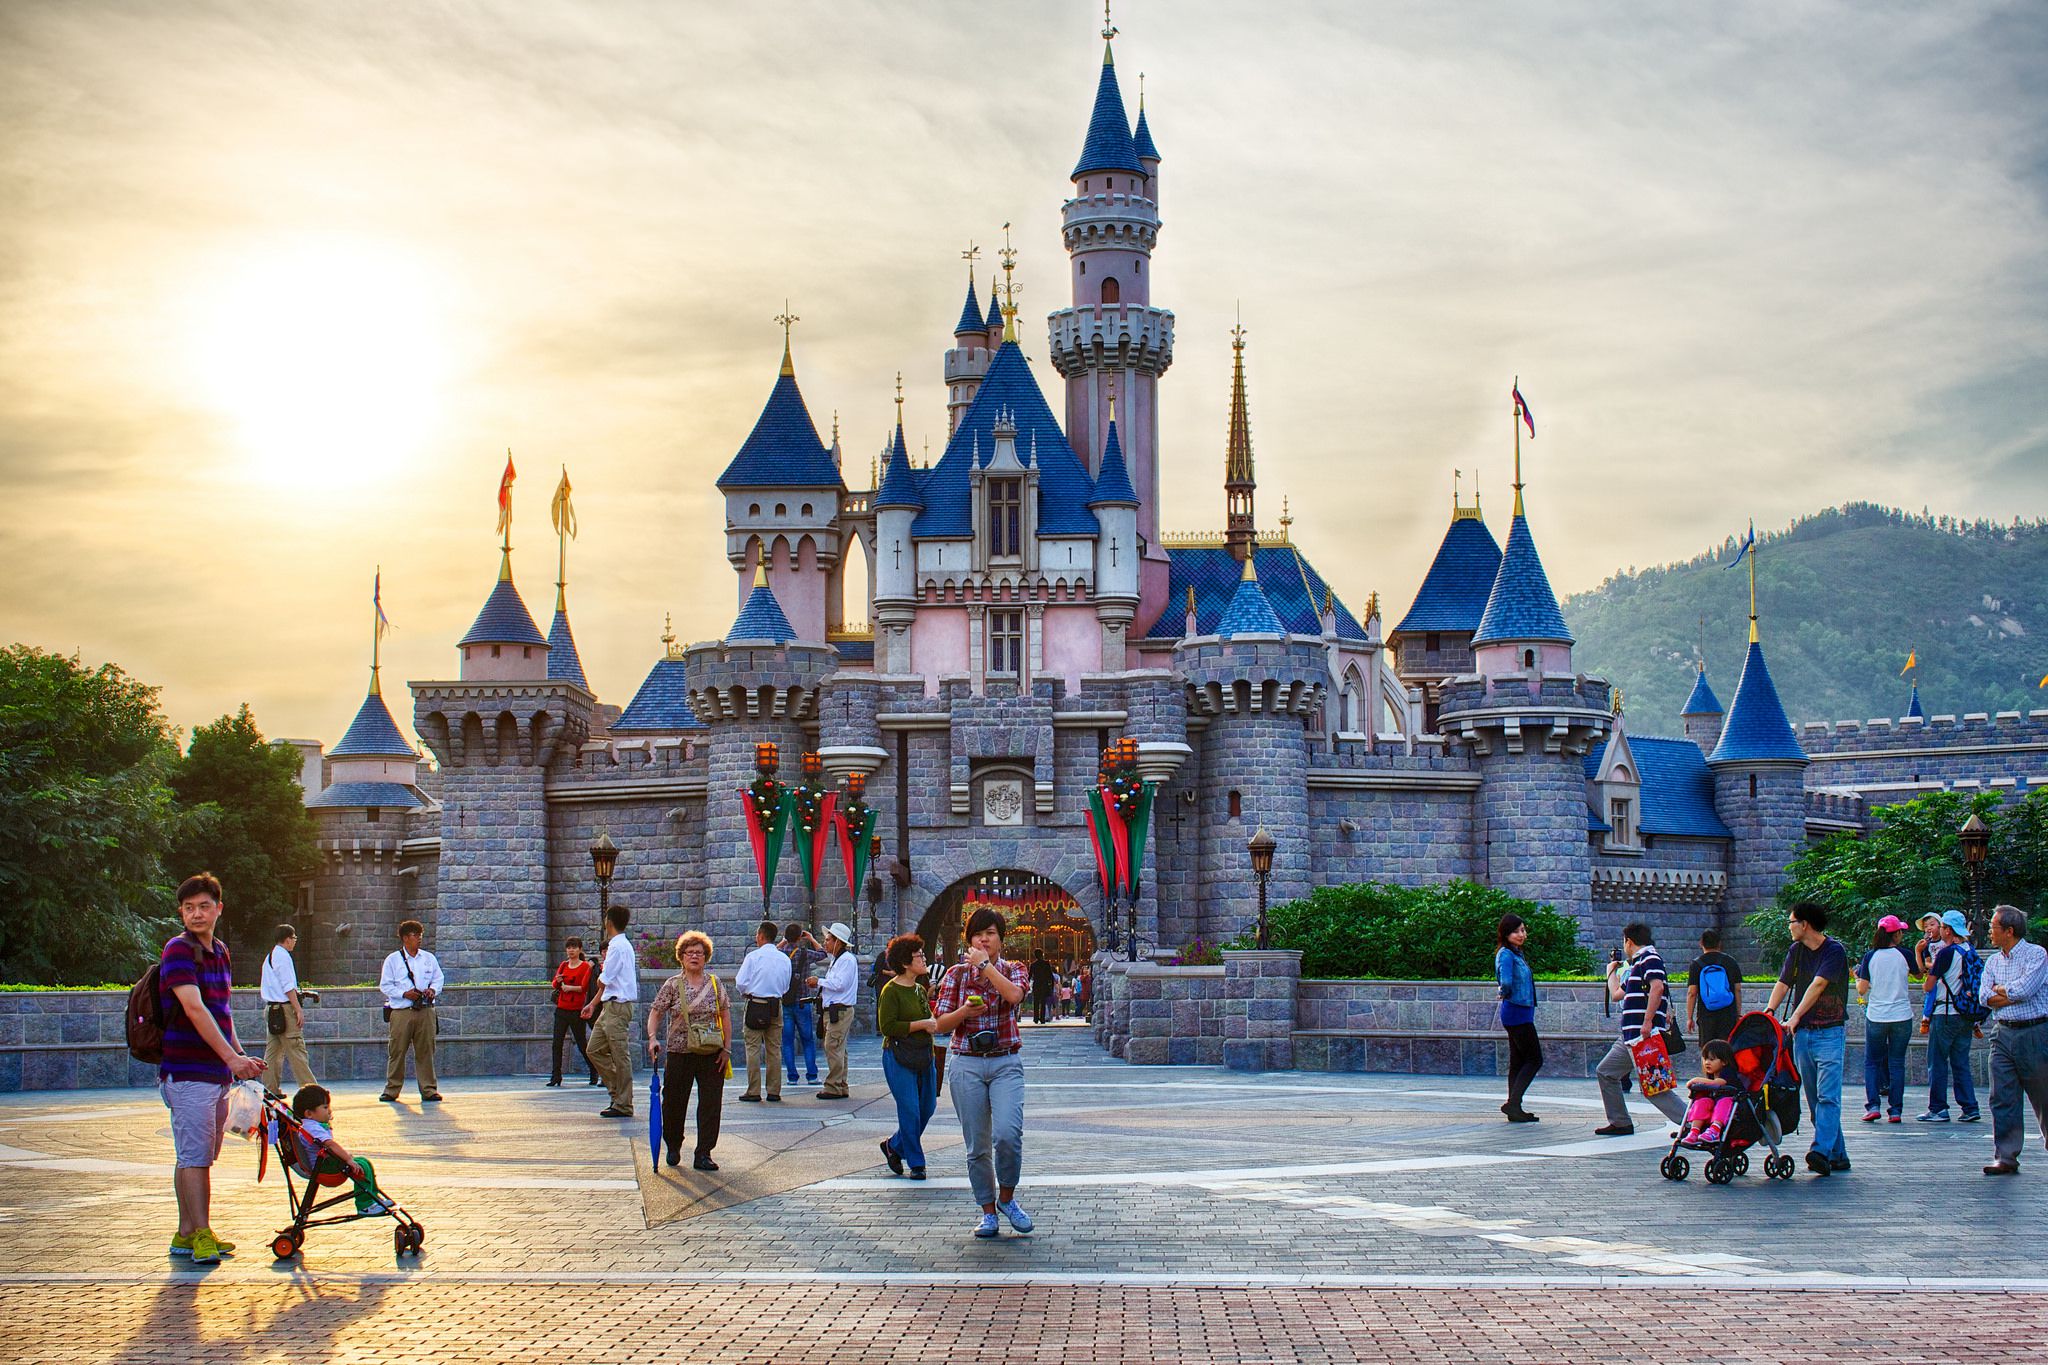 Where to Get Discounts on Hong Kong Disneyland Ticket Prices